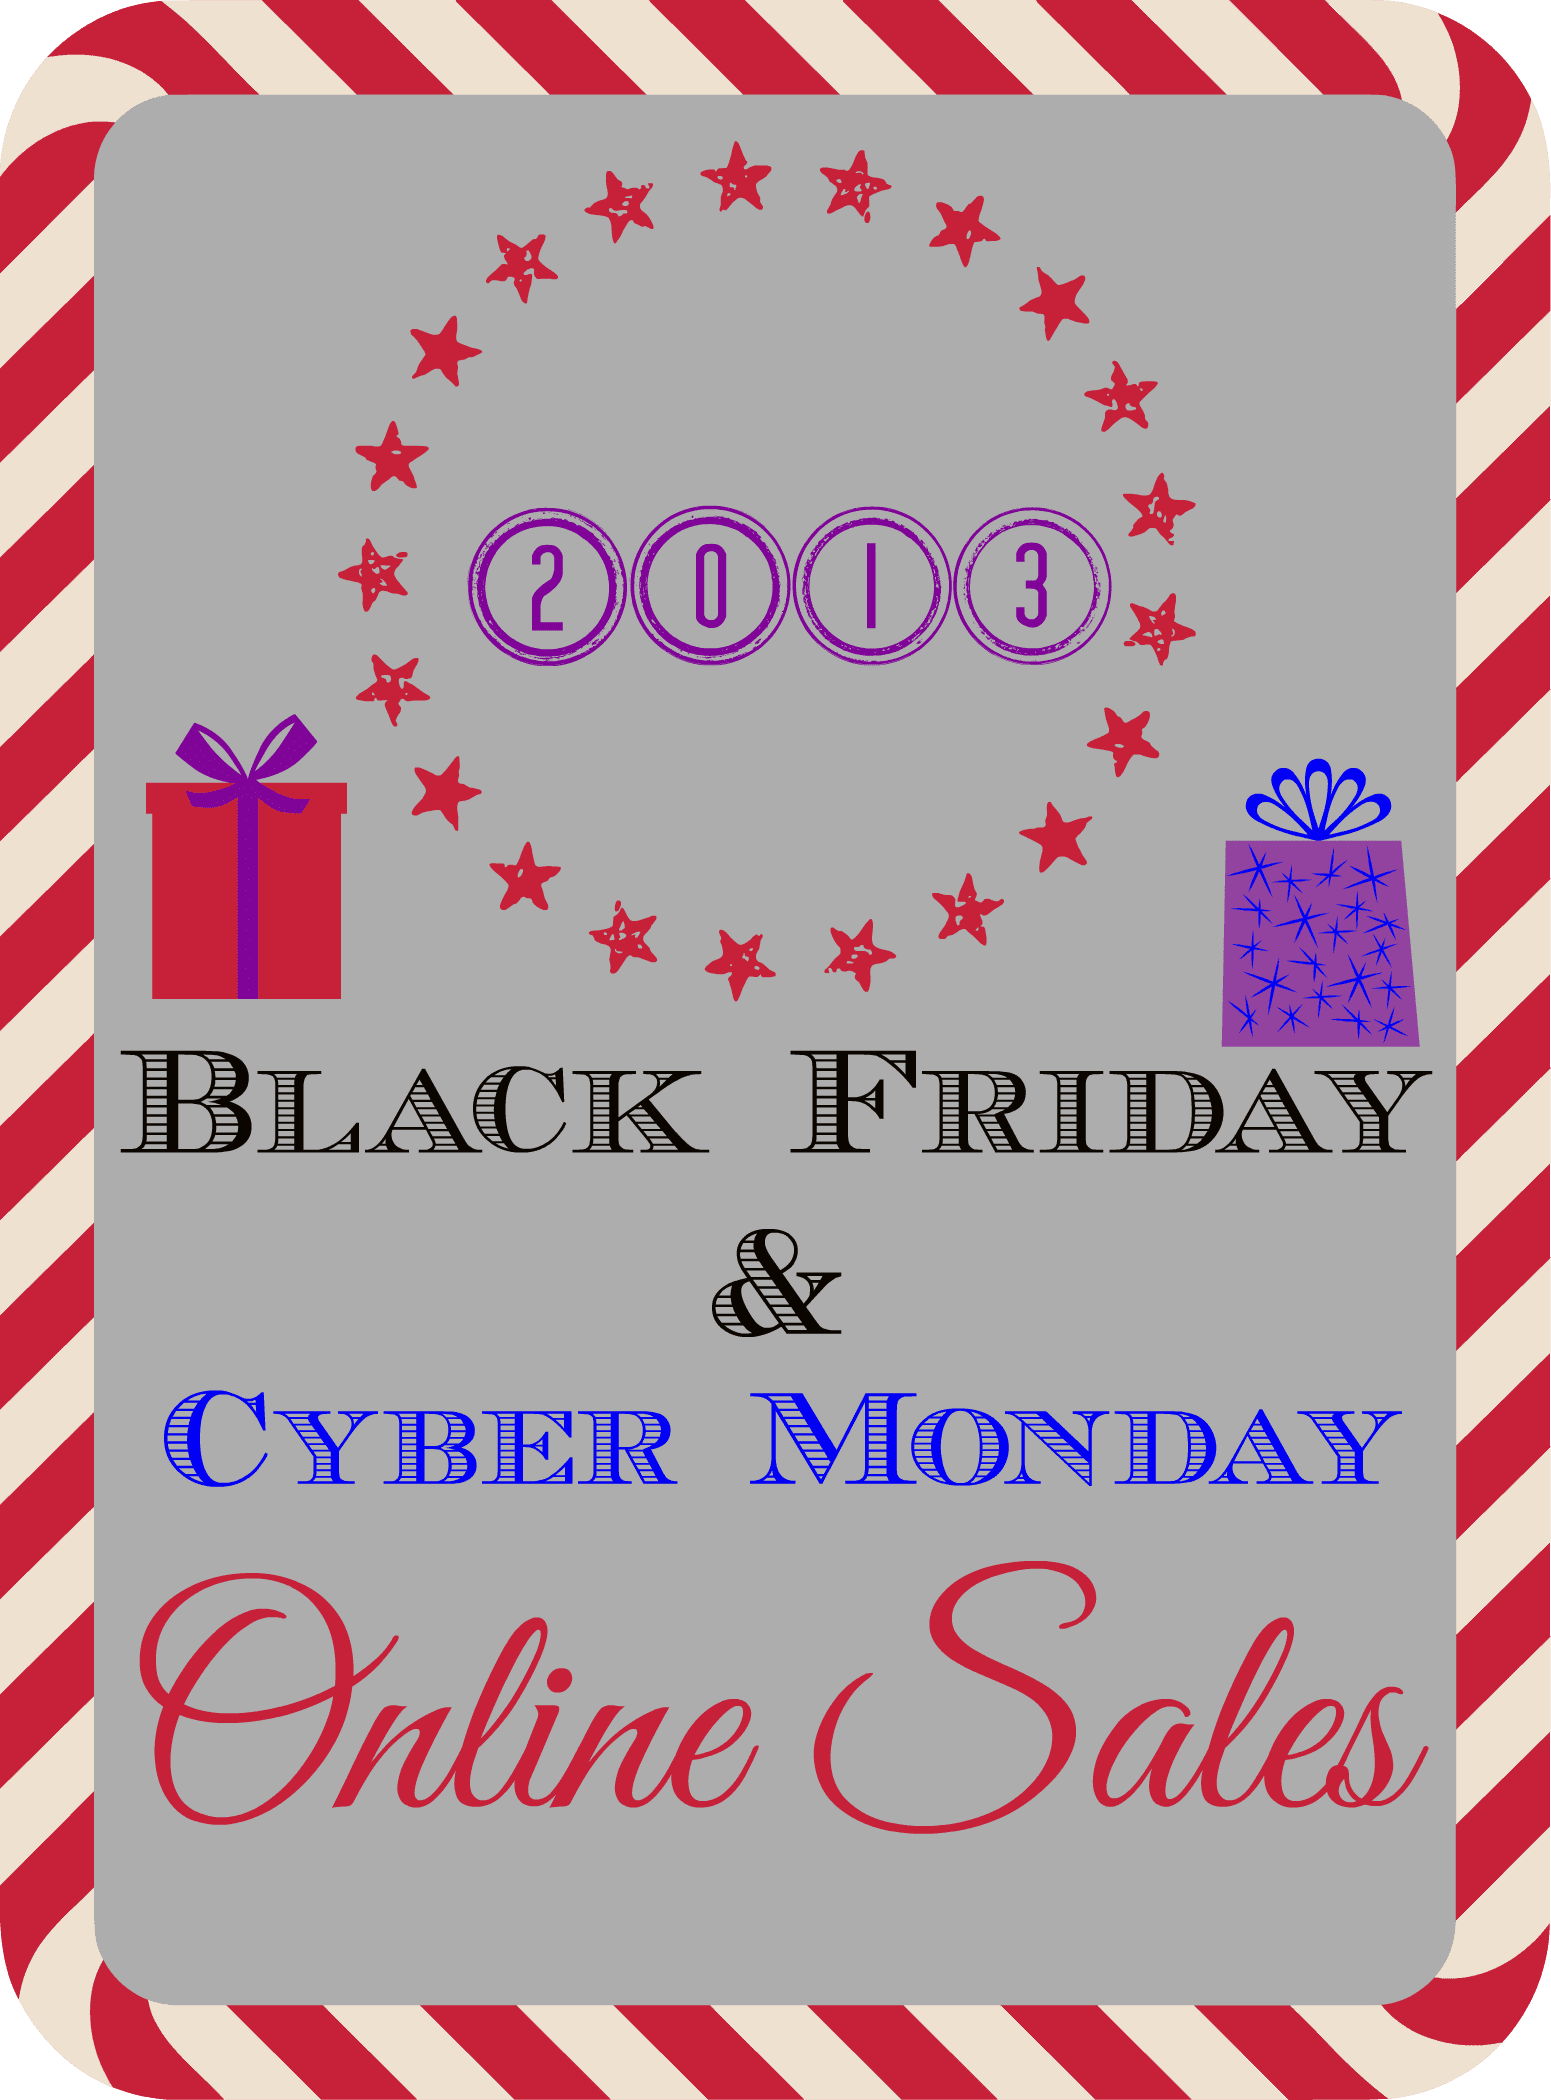 Black Friday and Cyber Monday 2013 Sales